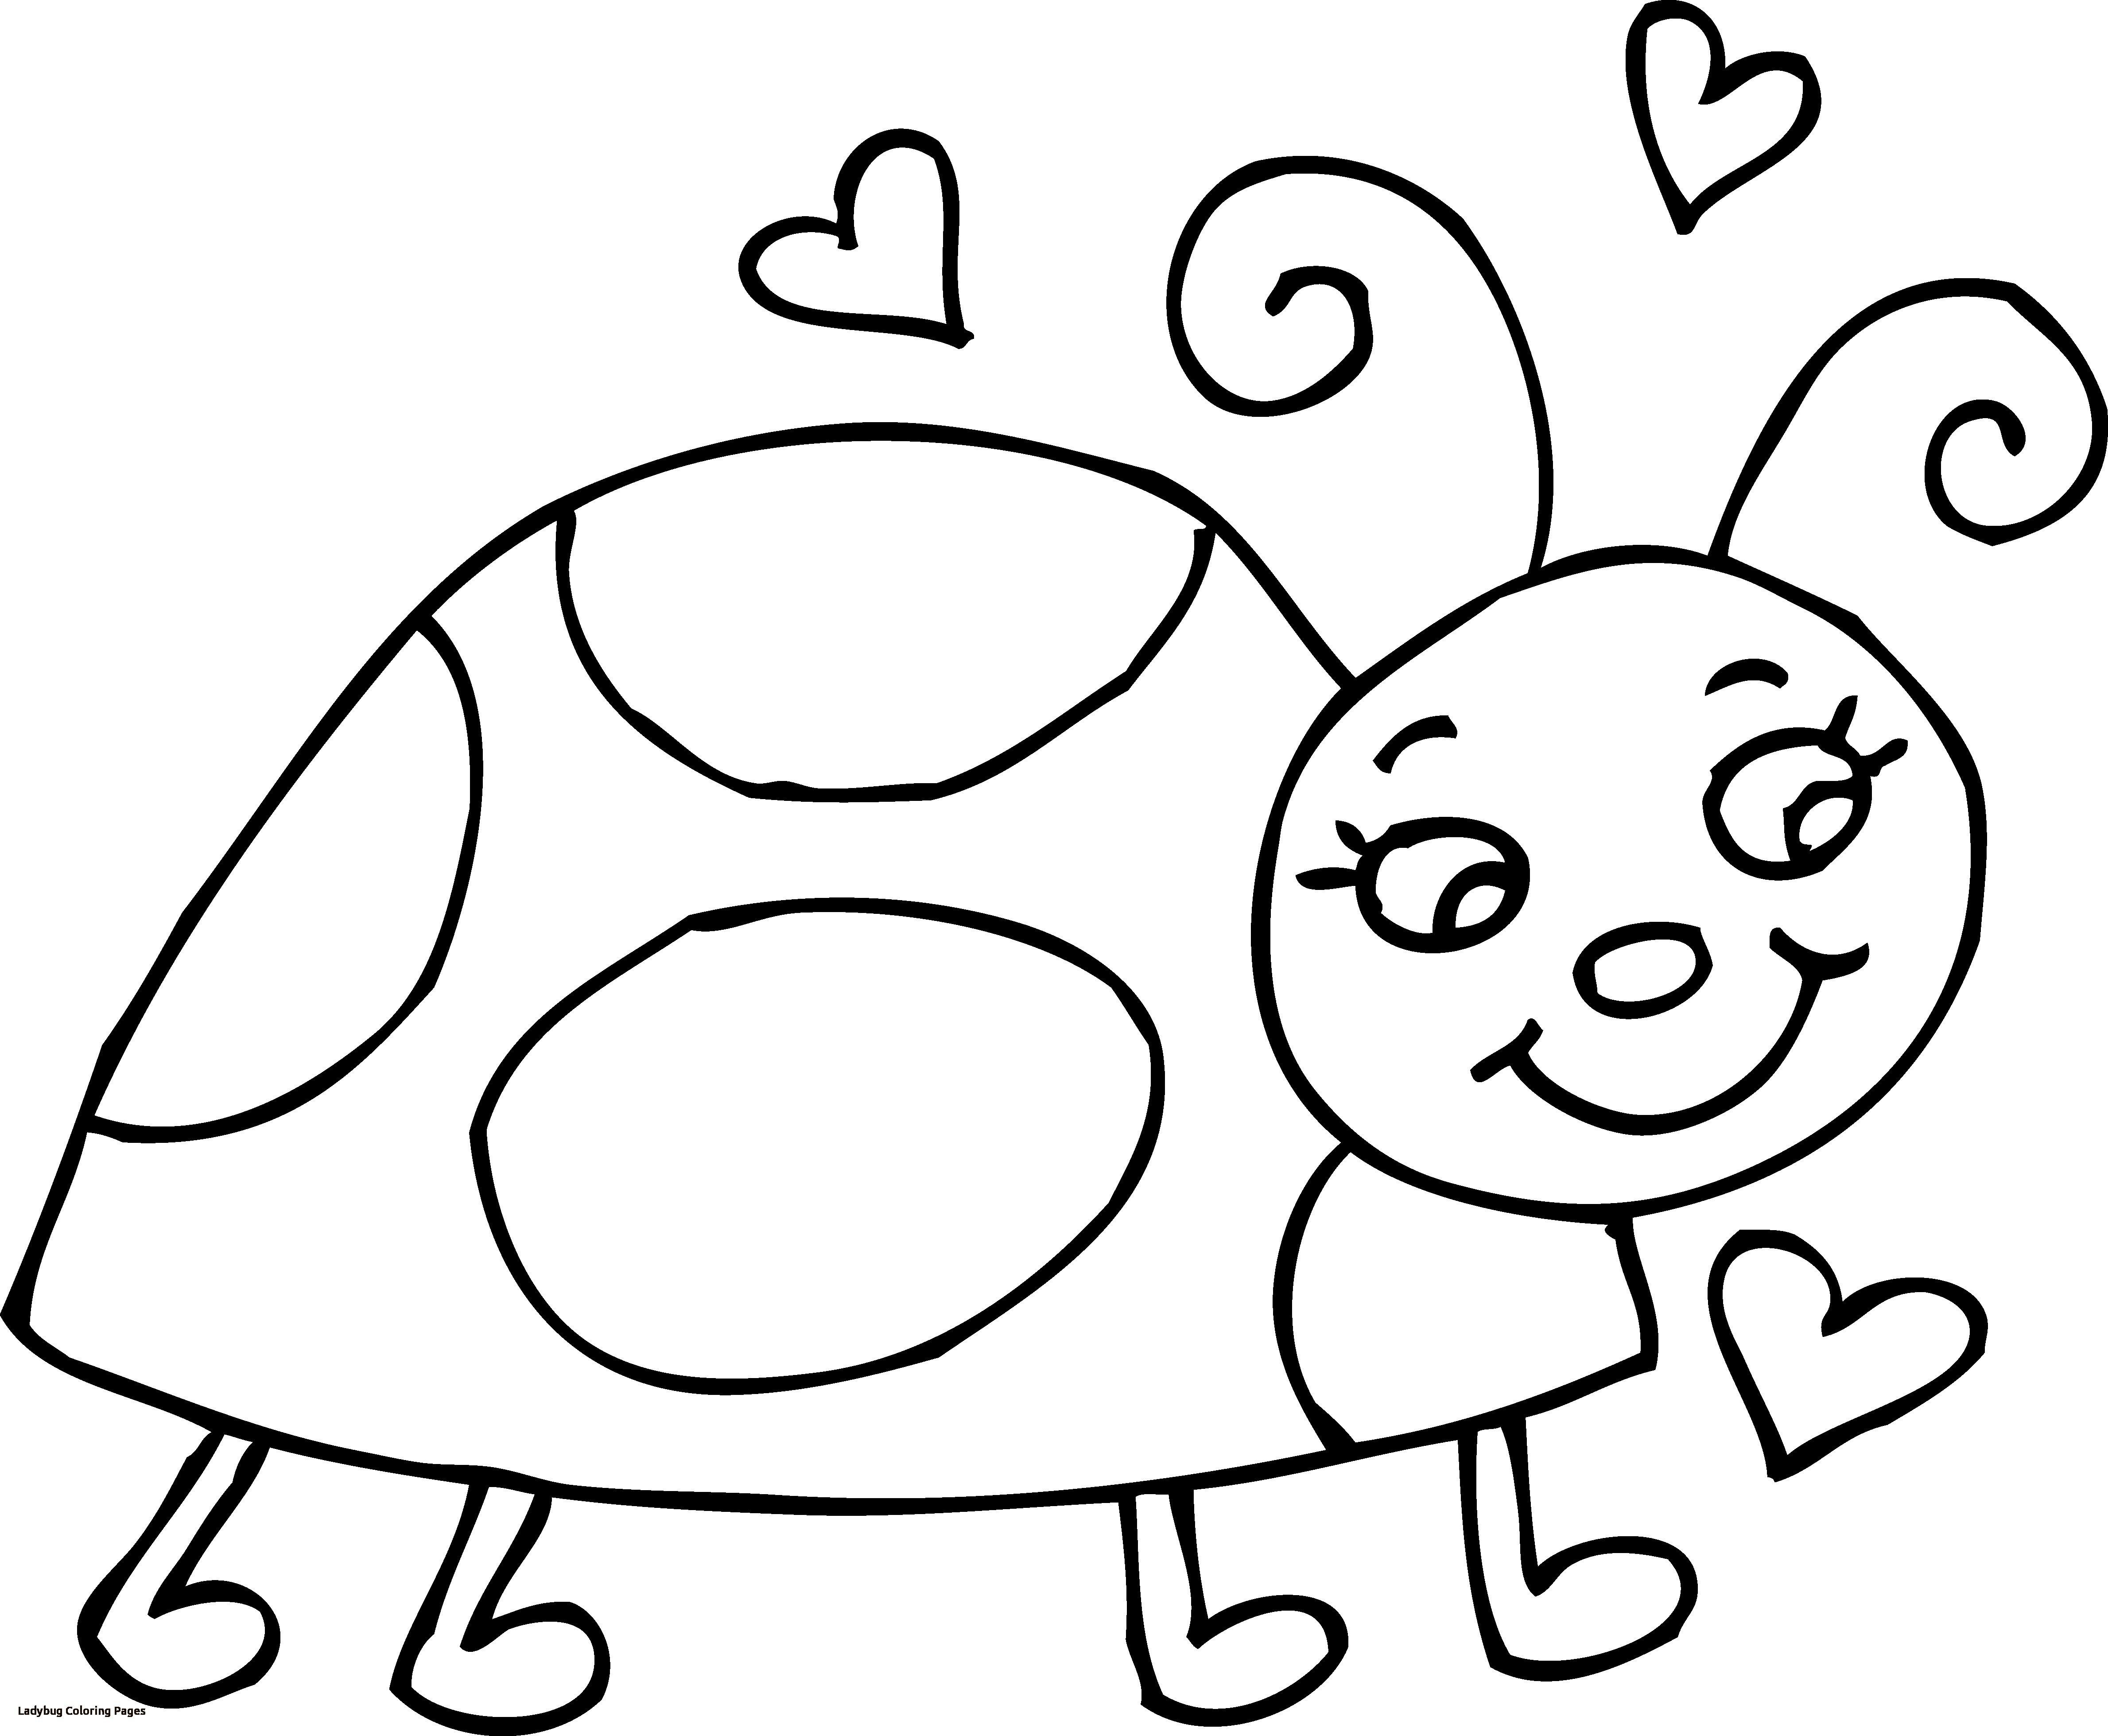 Coloring Pages : Ladybug Coloring Pages Printable Pictures ...